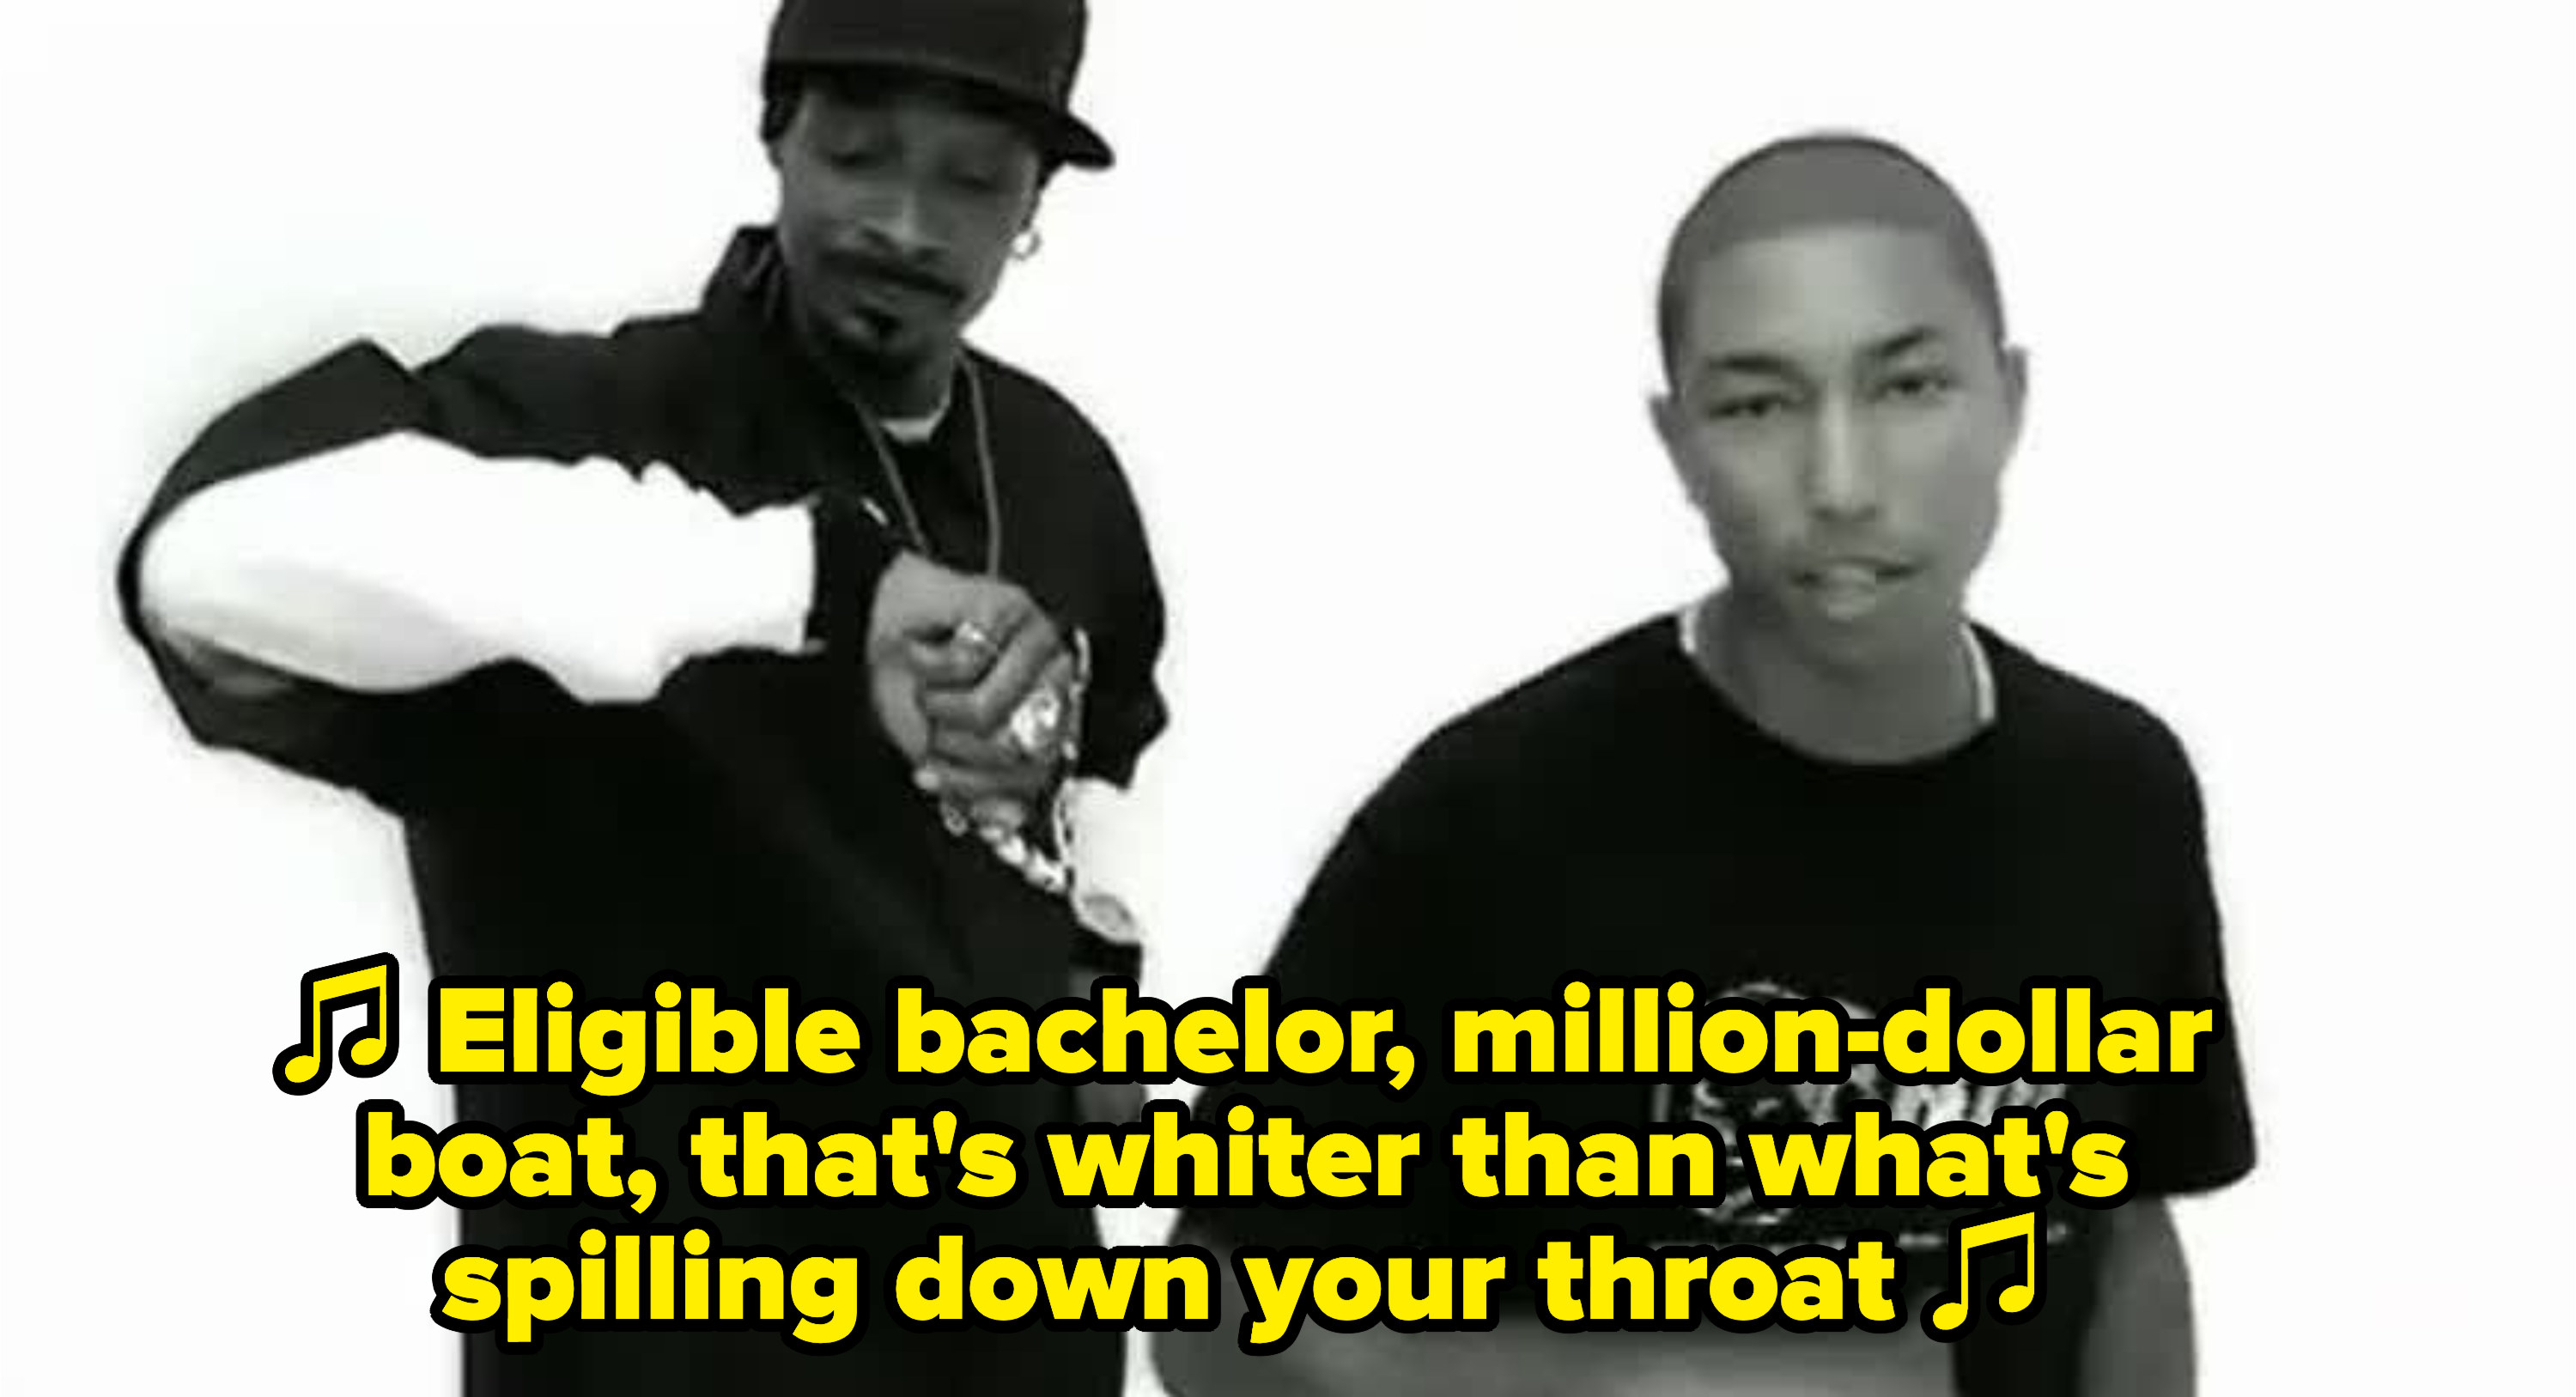 Pharrell singing: &quot;Eligible bachelor, million-dollar boat / That&#x27;s whiter than what&#x27;s spilling down your throat&quot;
